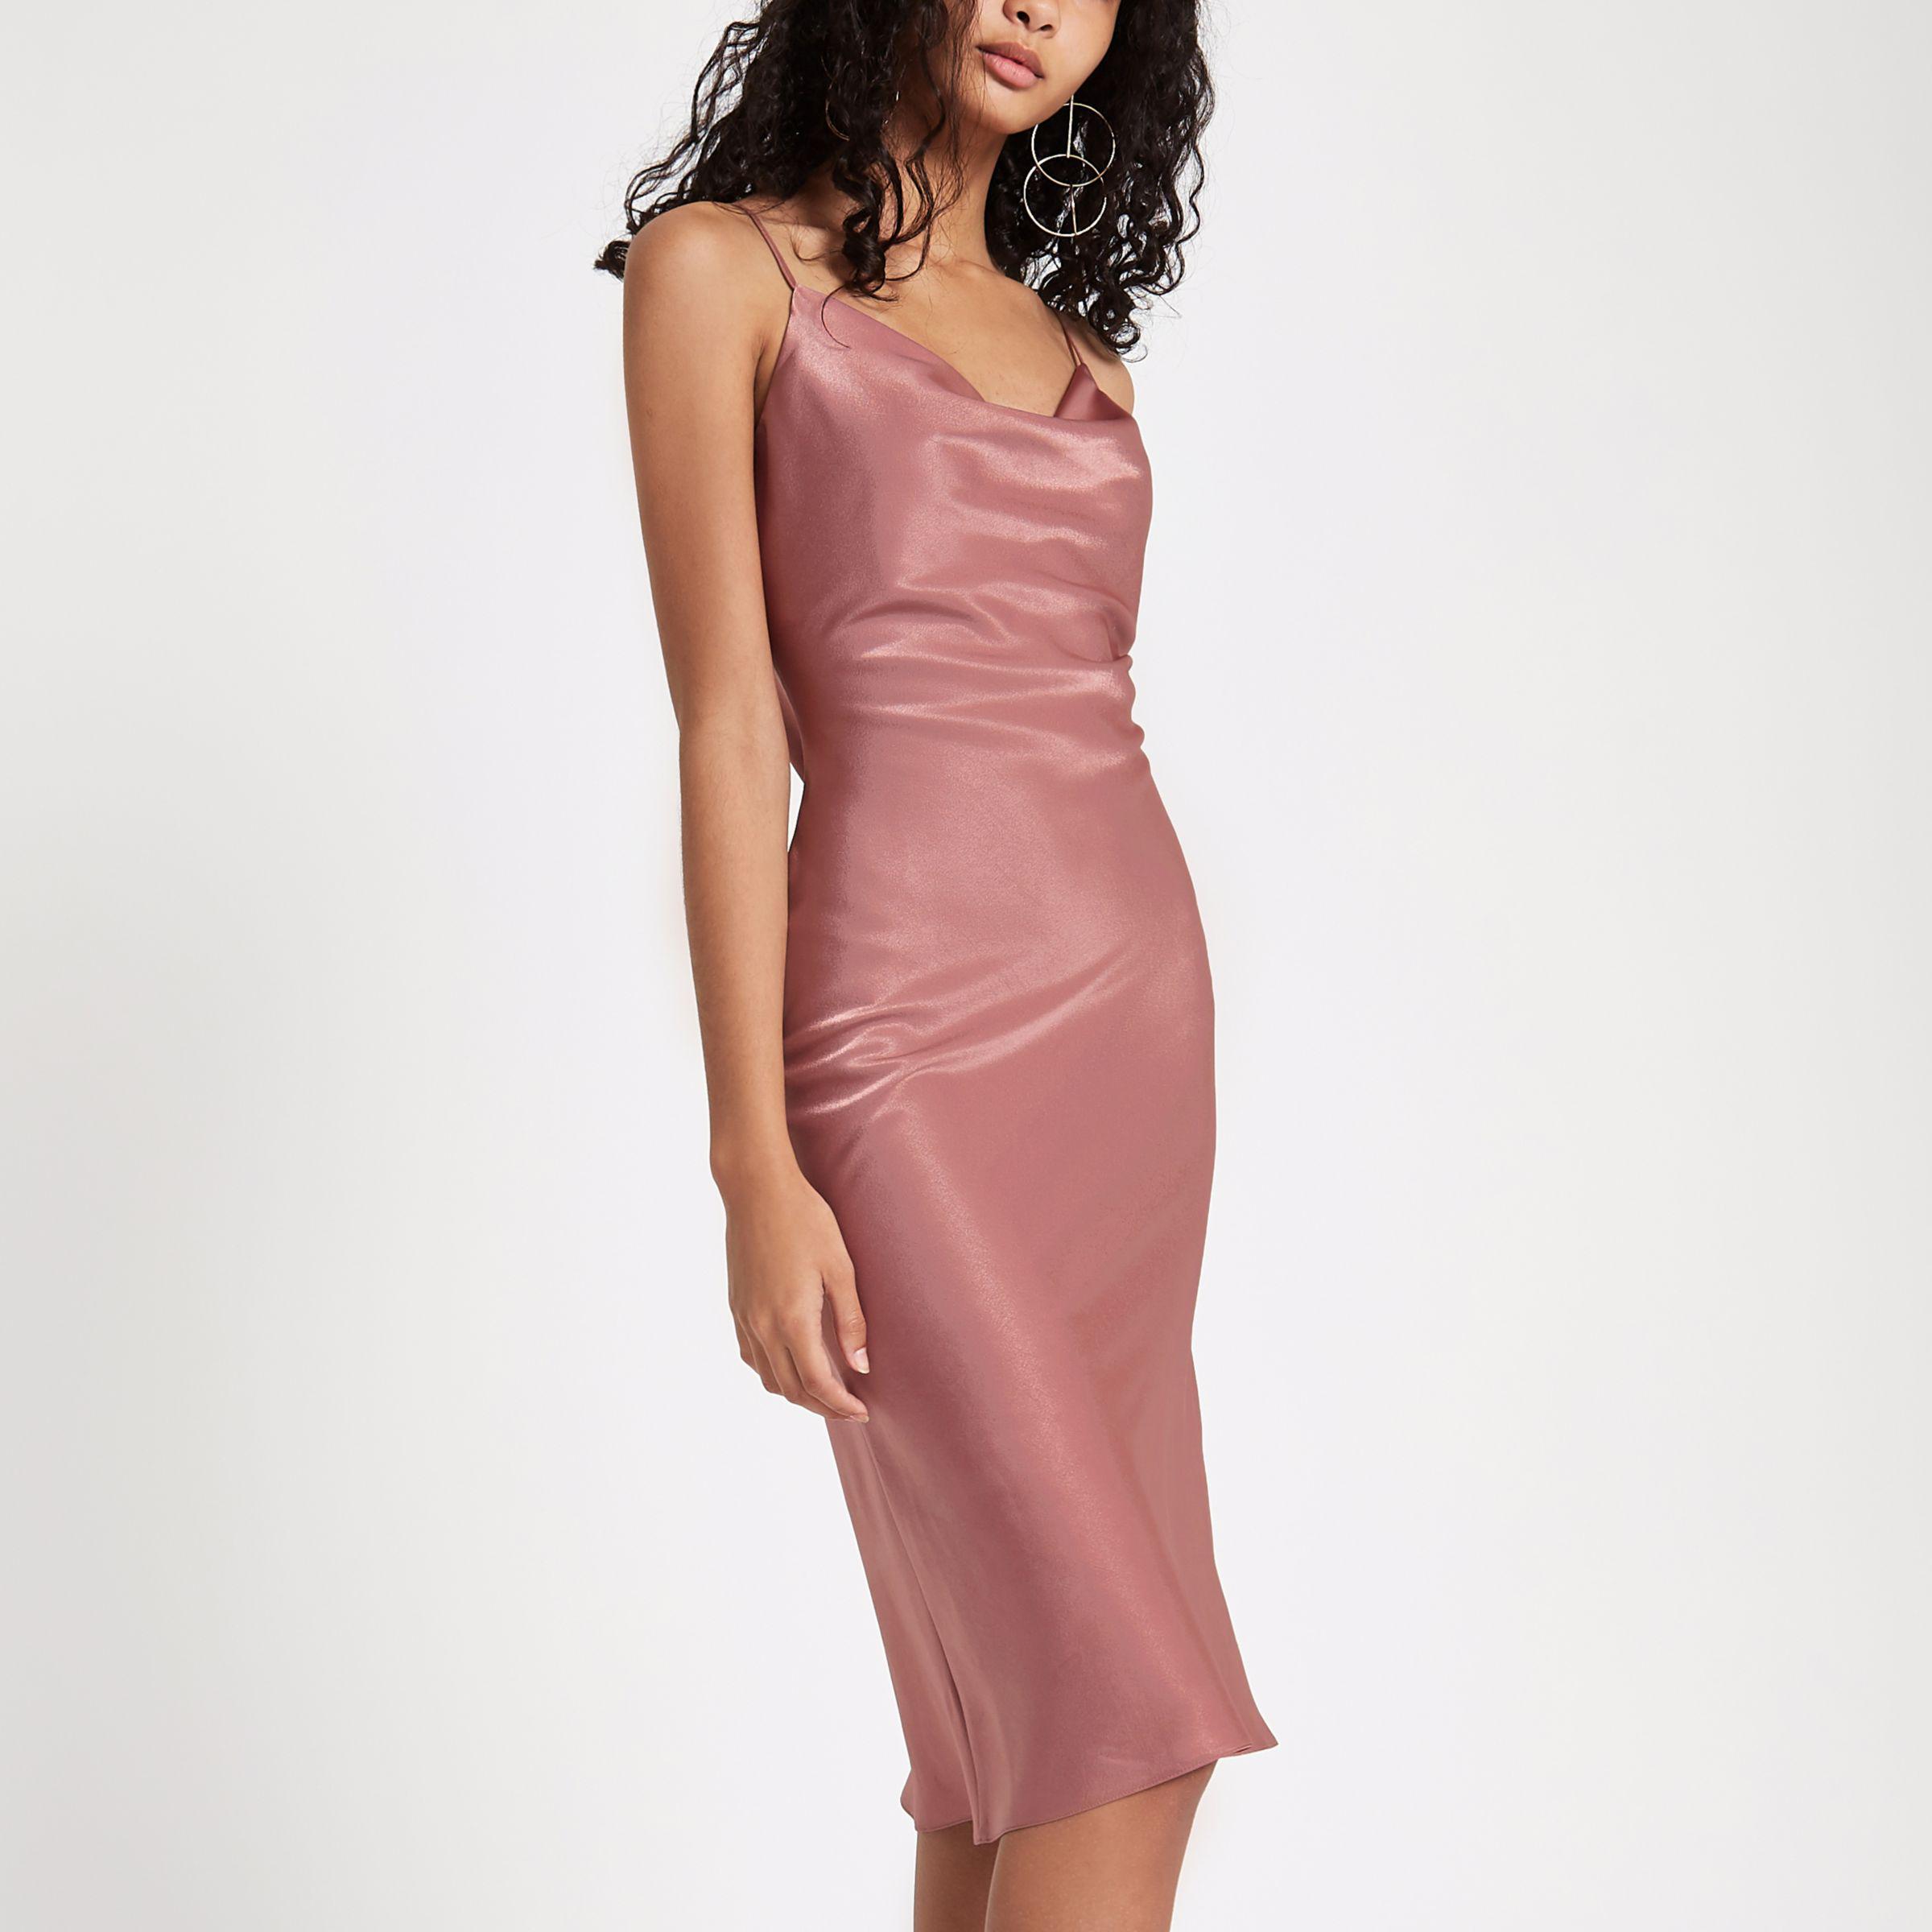 Synthetic Cowl Neck Slip Dress in Pink ...